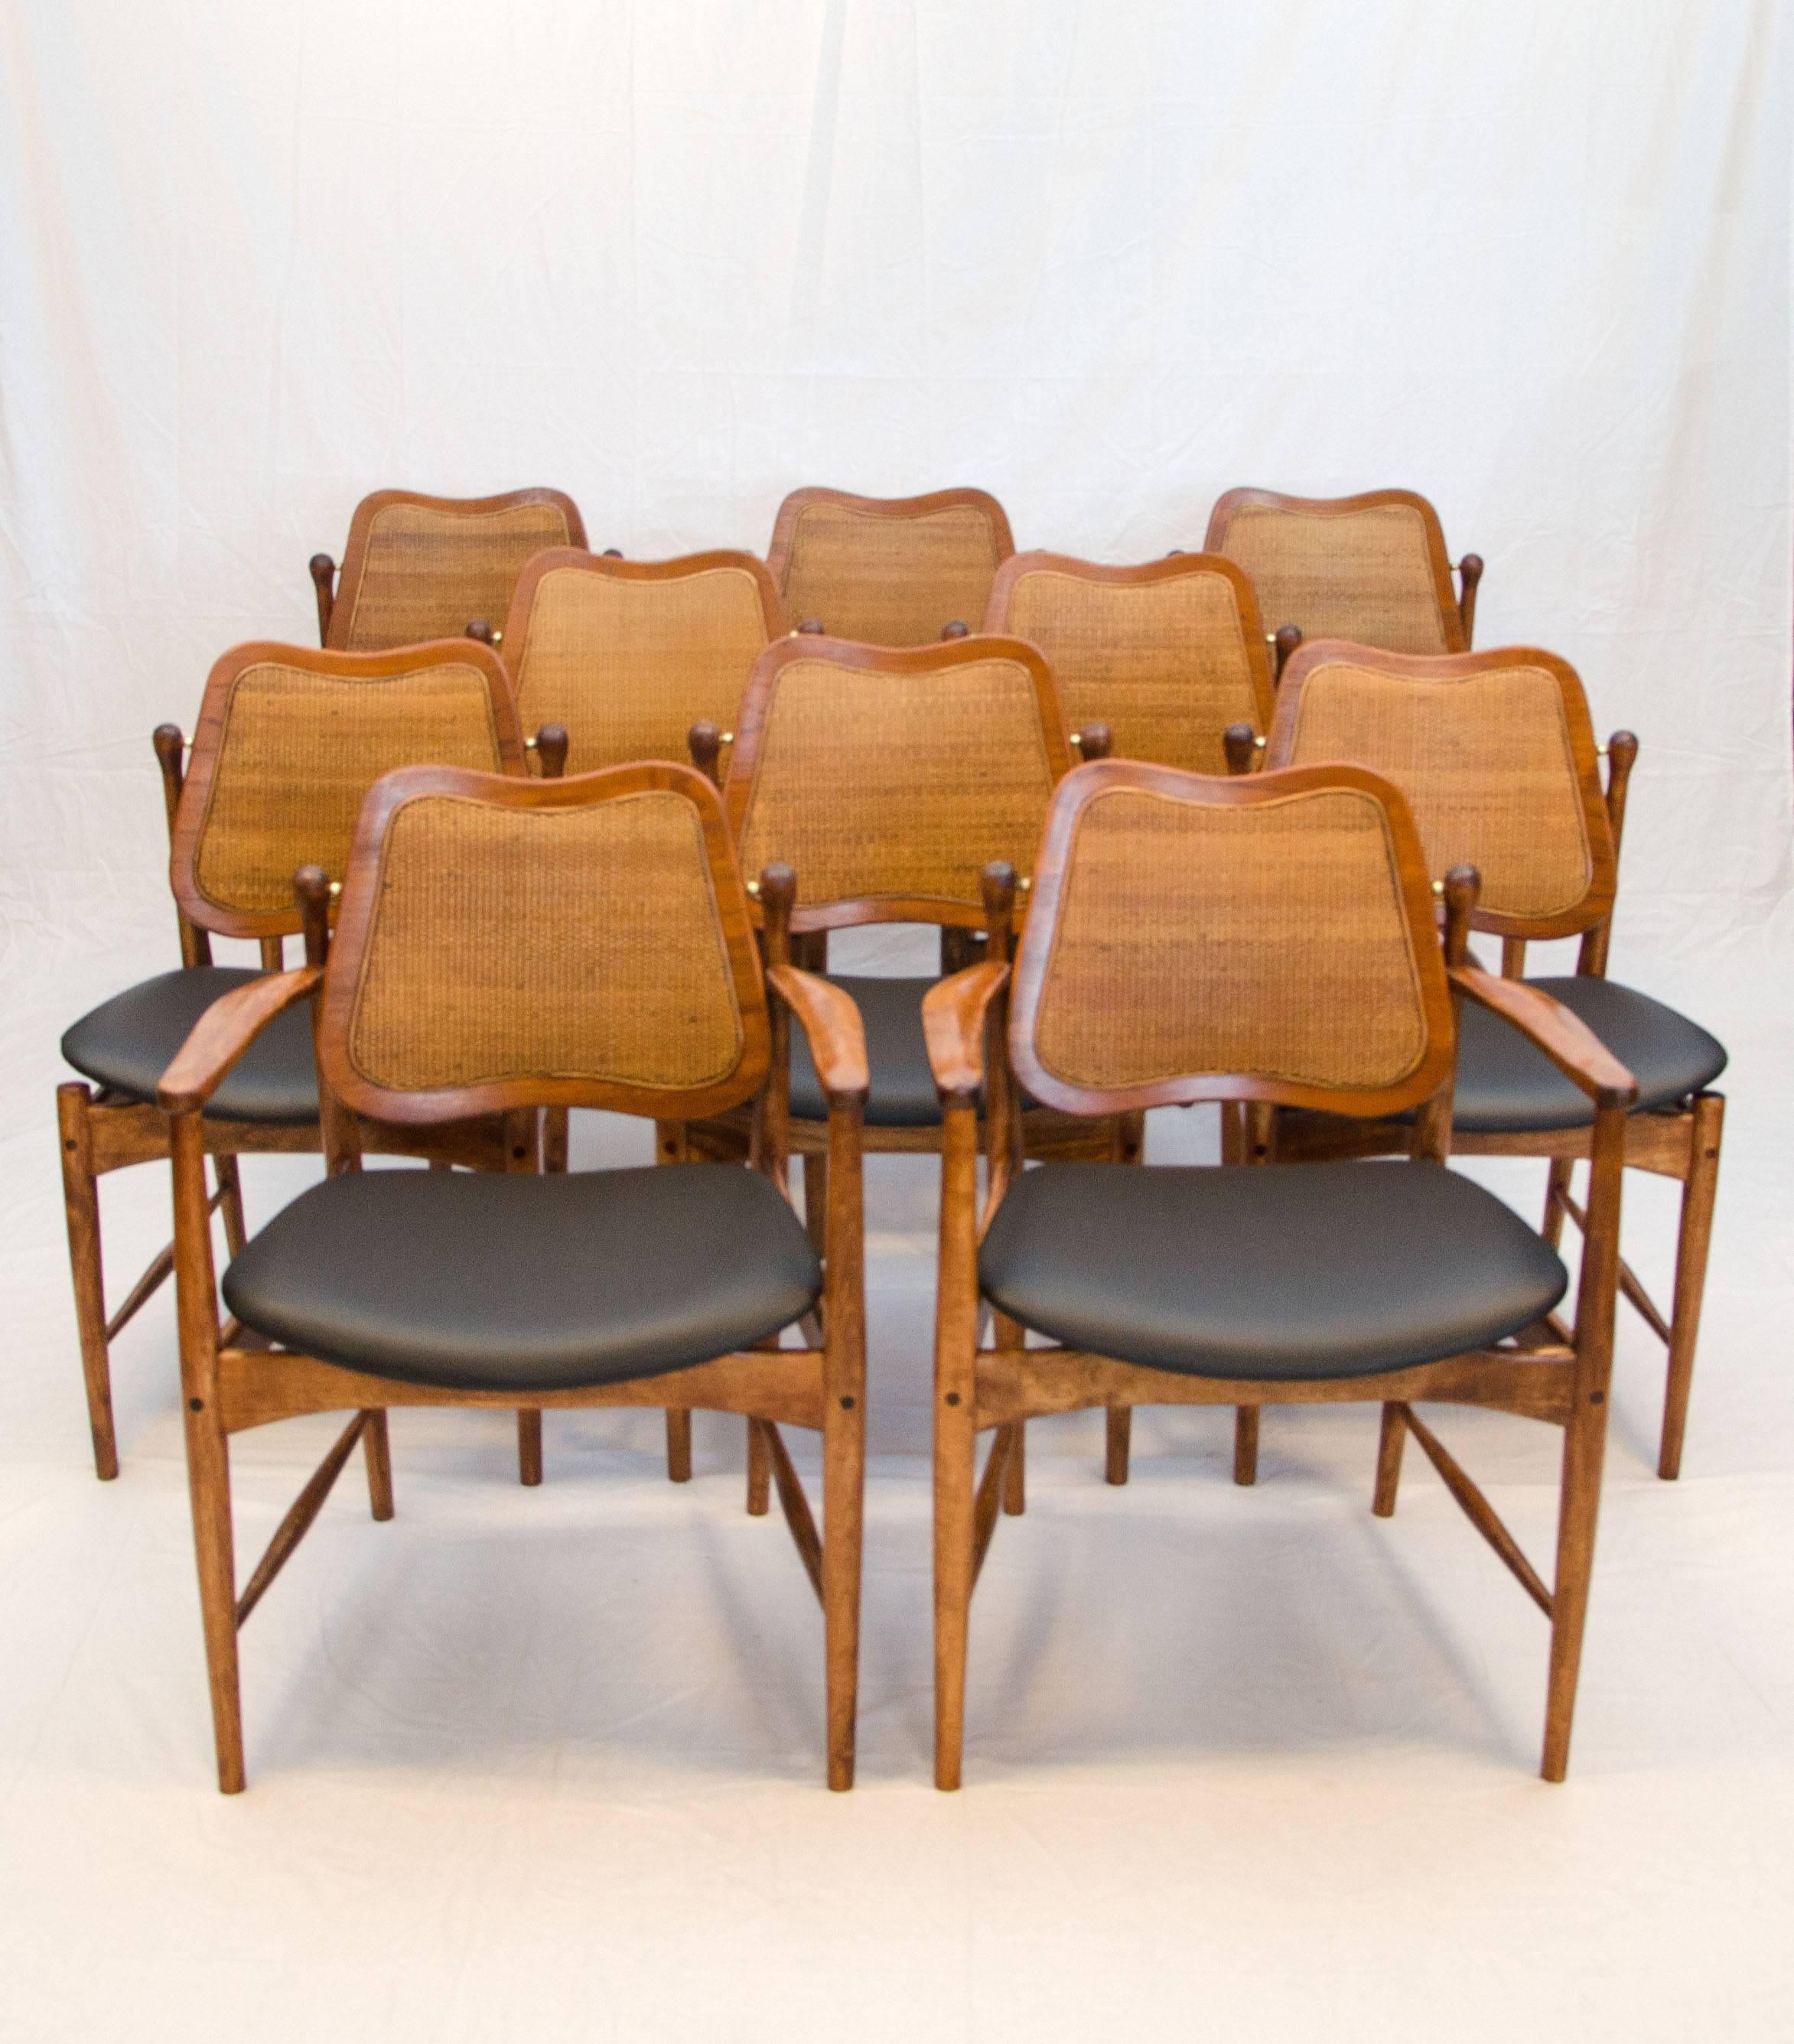 Rare set of ten Danish dining chairs designed by Arne Vodder. The teak backs retain the original caned inserts. The seats have a floating design in the way they attach to the frame. The swivel backs have a wooden crossbar behind them to keep them in